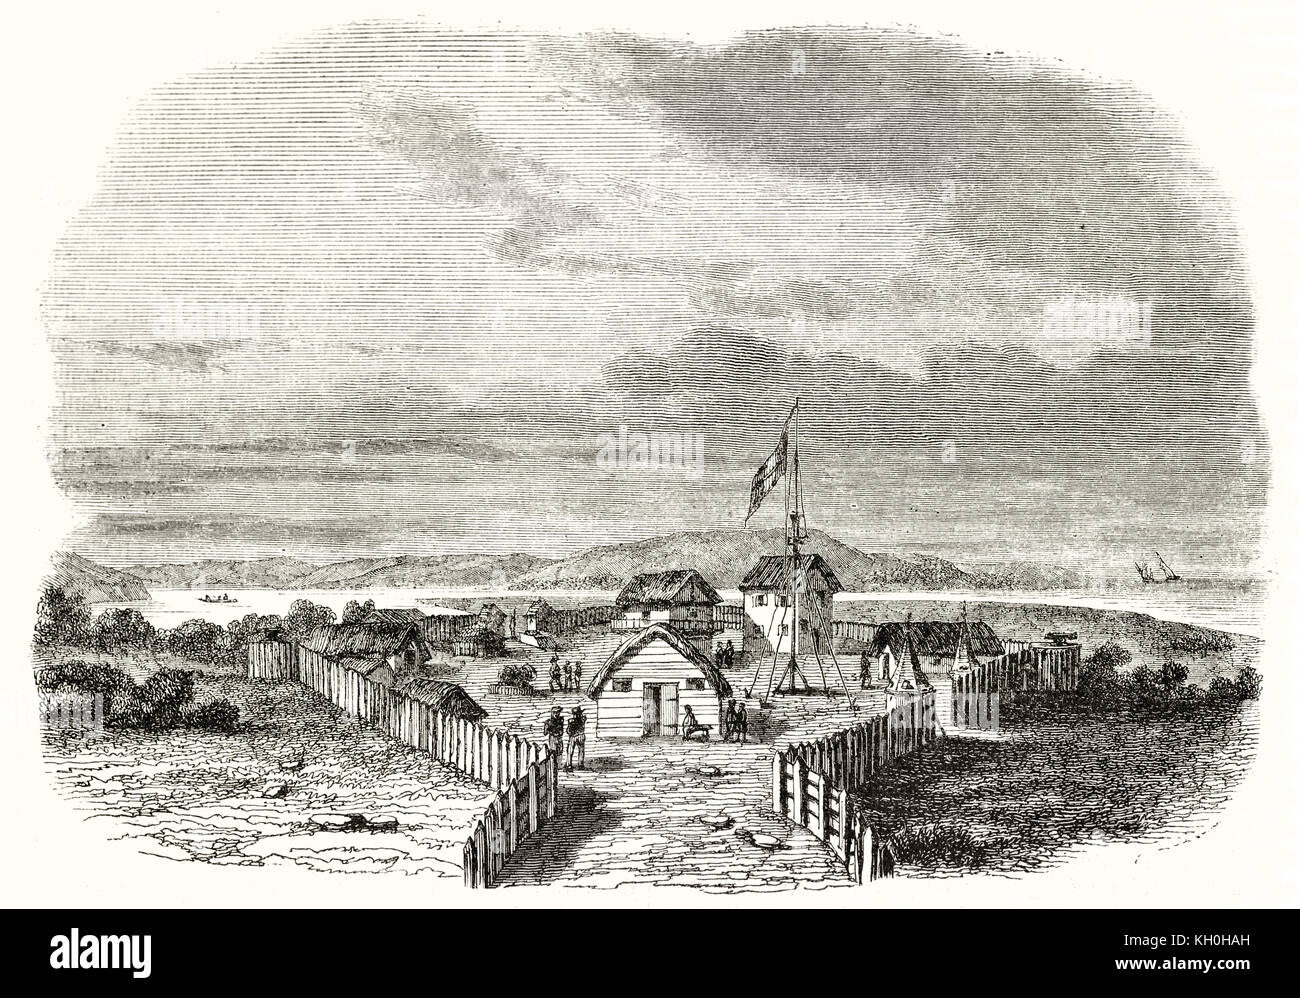 Old view of French colonial settlement in Grand-Bassam, Ivory Coast. By Nouveaux, publ. on Magasin Pittoresque, Paris, 1847 Stock Photo